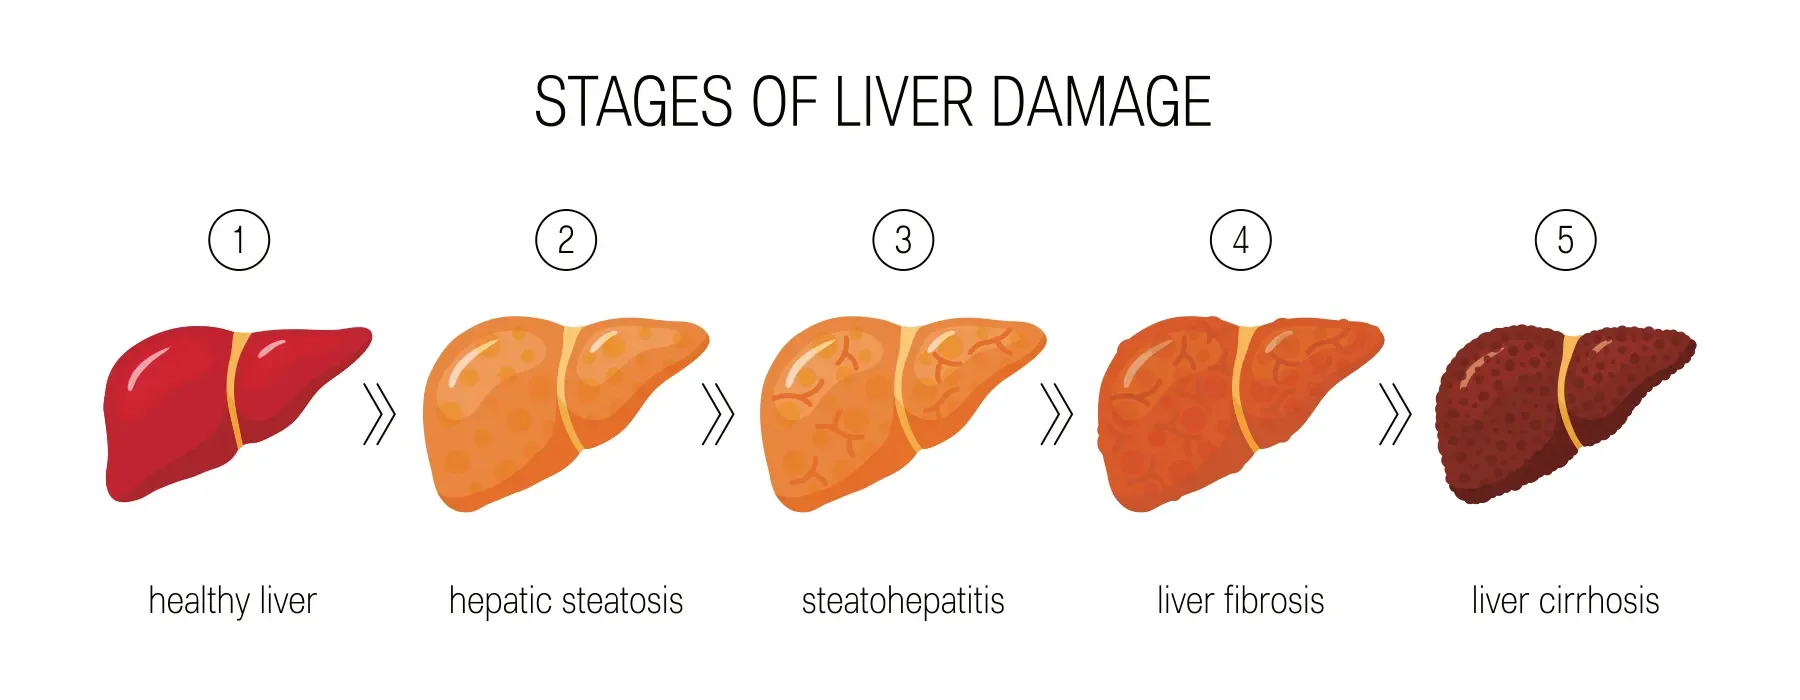 Stages of liver damage concept. Vector illustration of healthy liver, steatosis, NASH, fibrosis and cirrhosis in cartoon style.